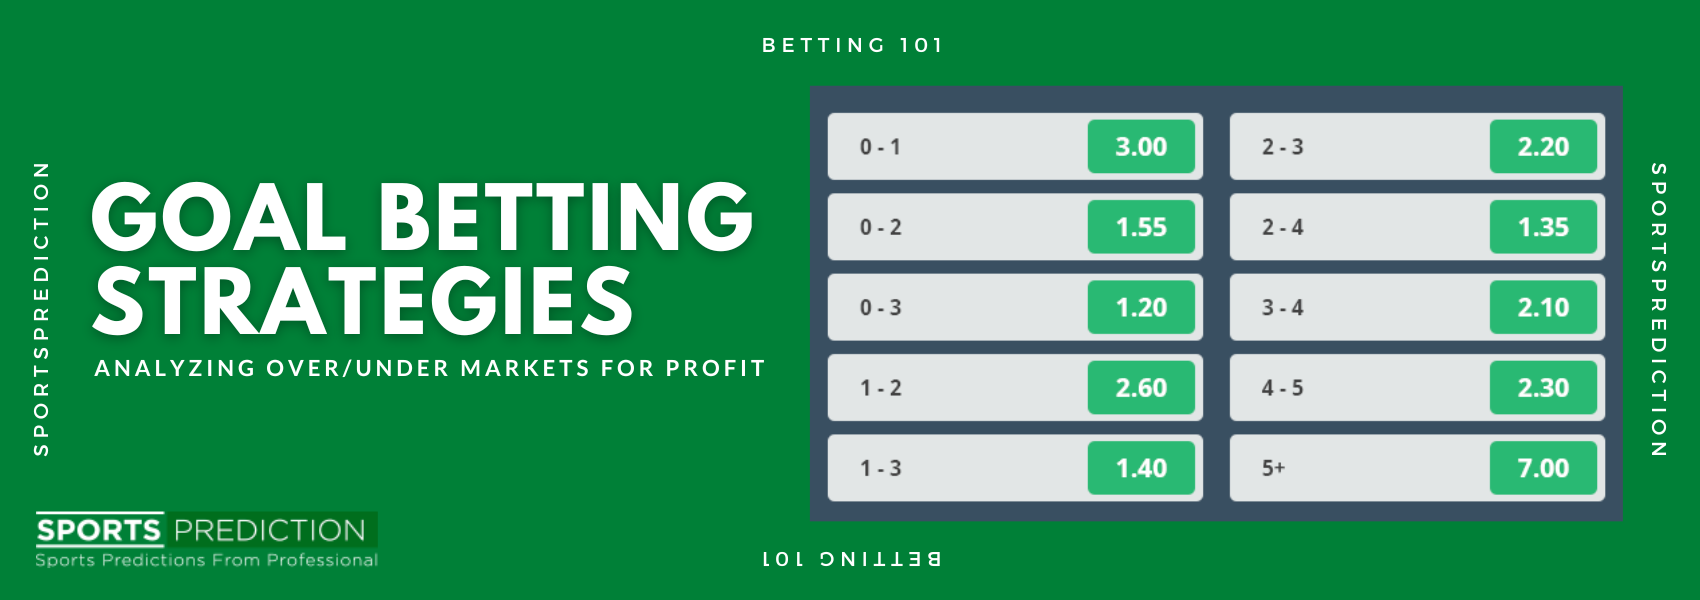 Goal Betting Strategies: Analyzing Over/Under Markets For Profit